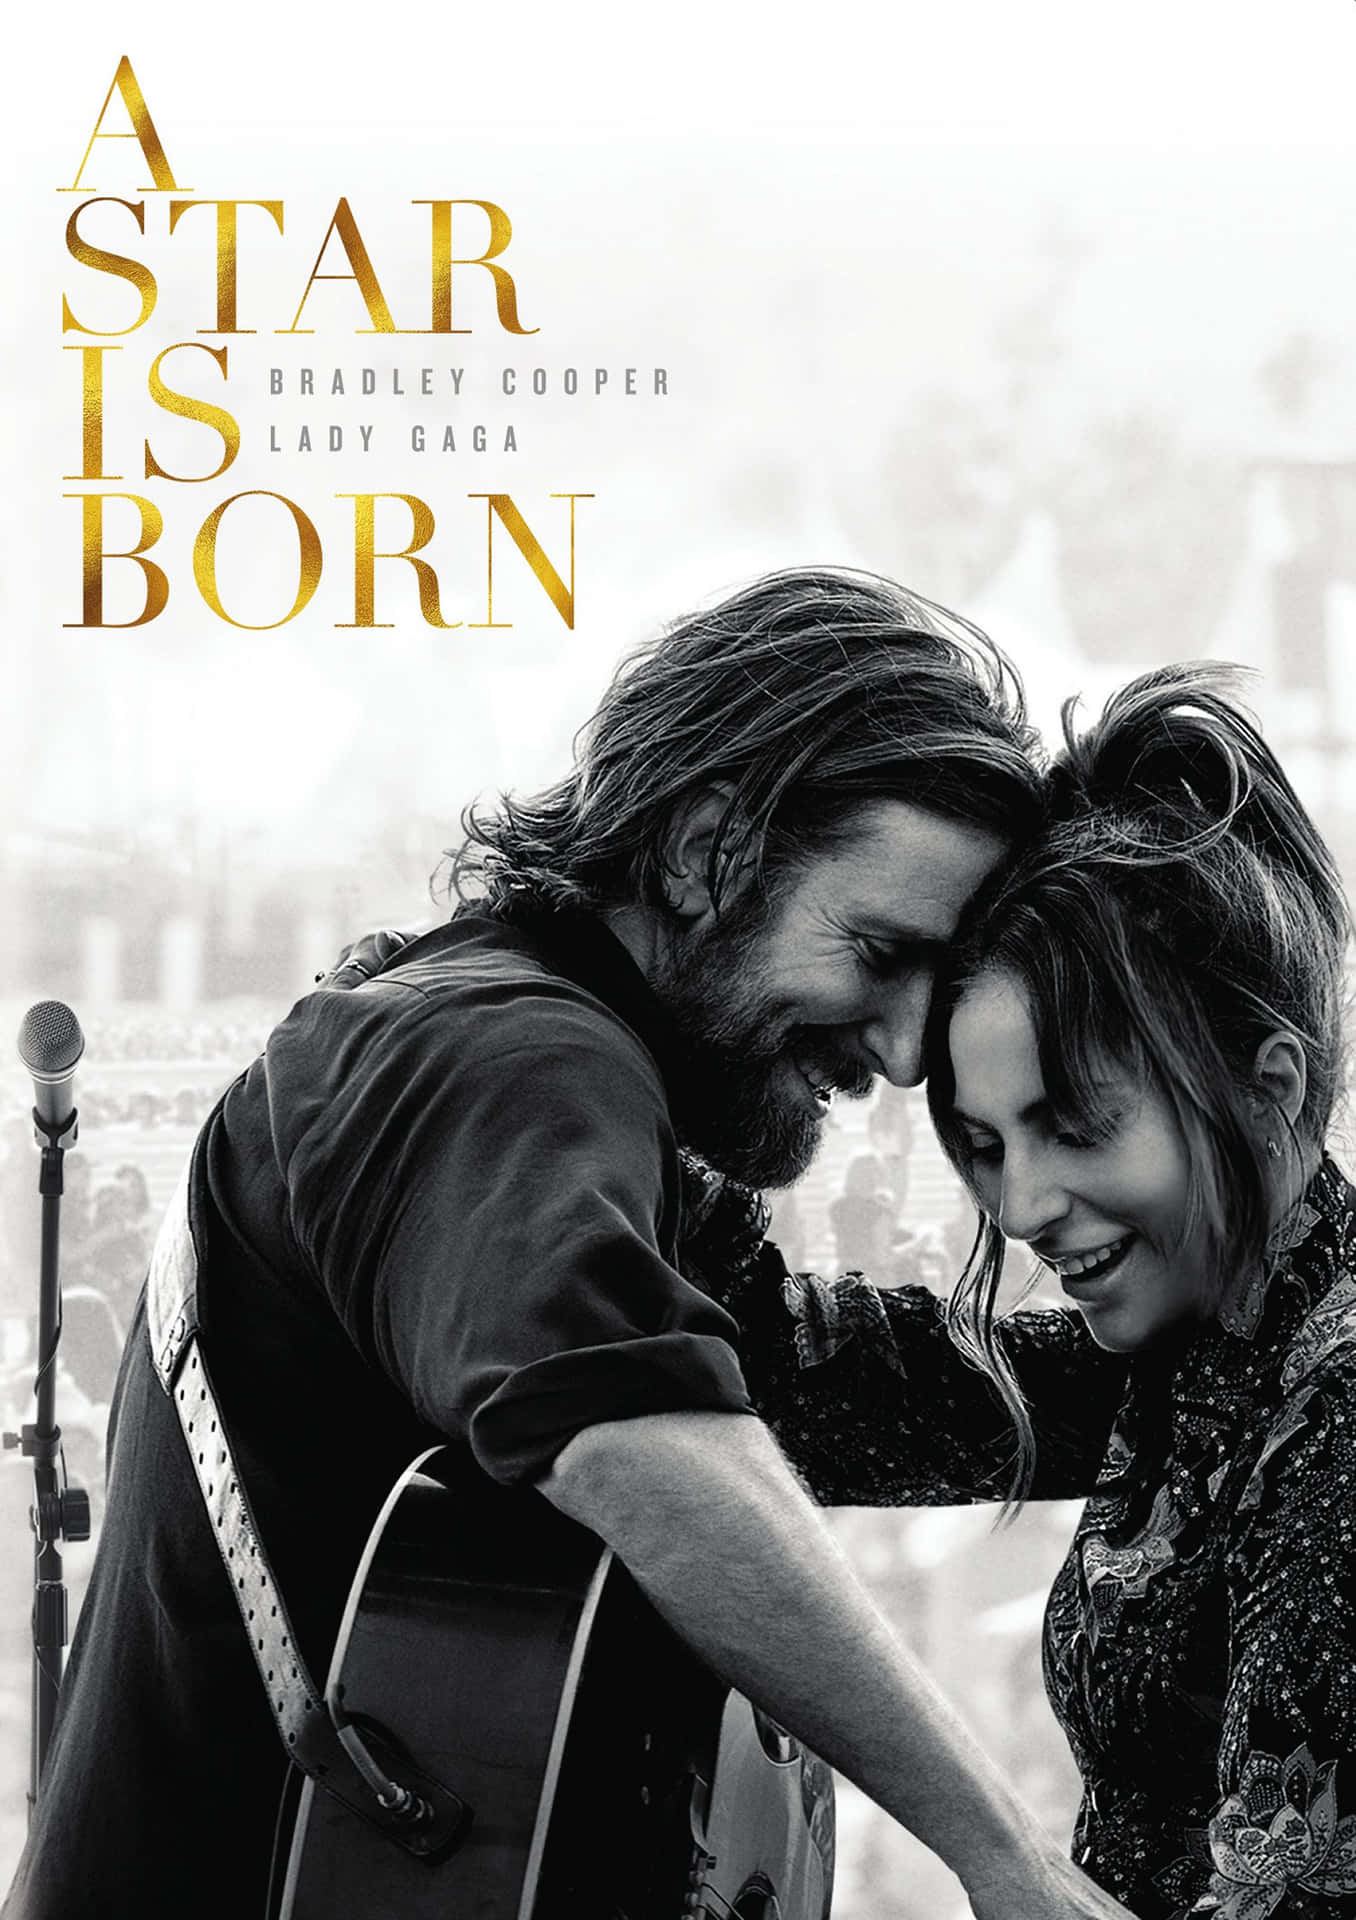 "bradley Cooper And Lady Gaga Performing In A Star Is Born" Wallpaper